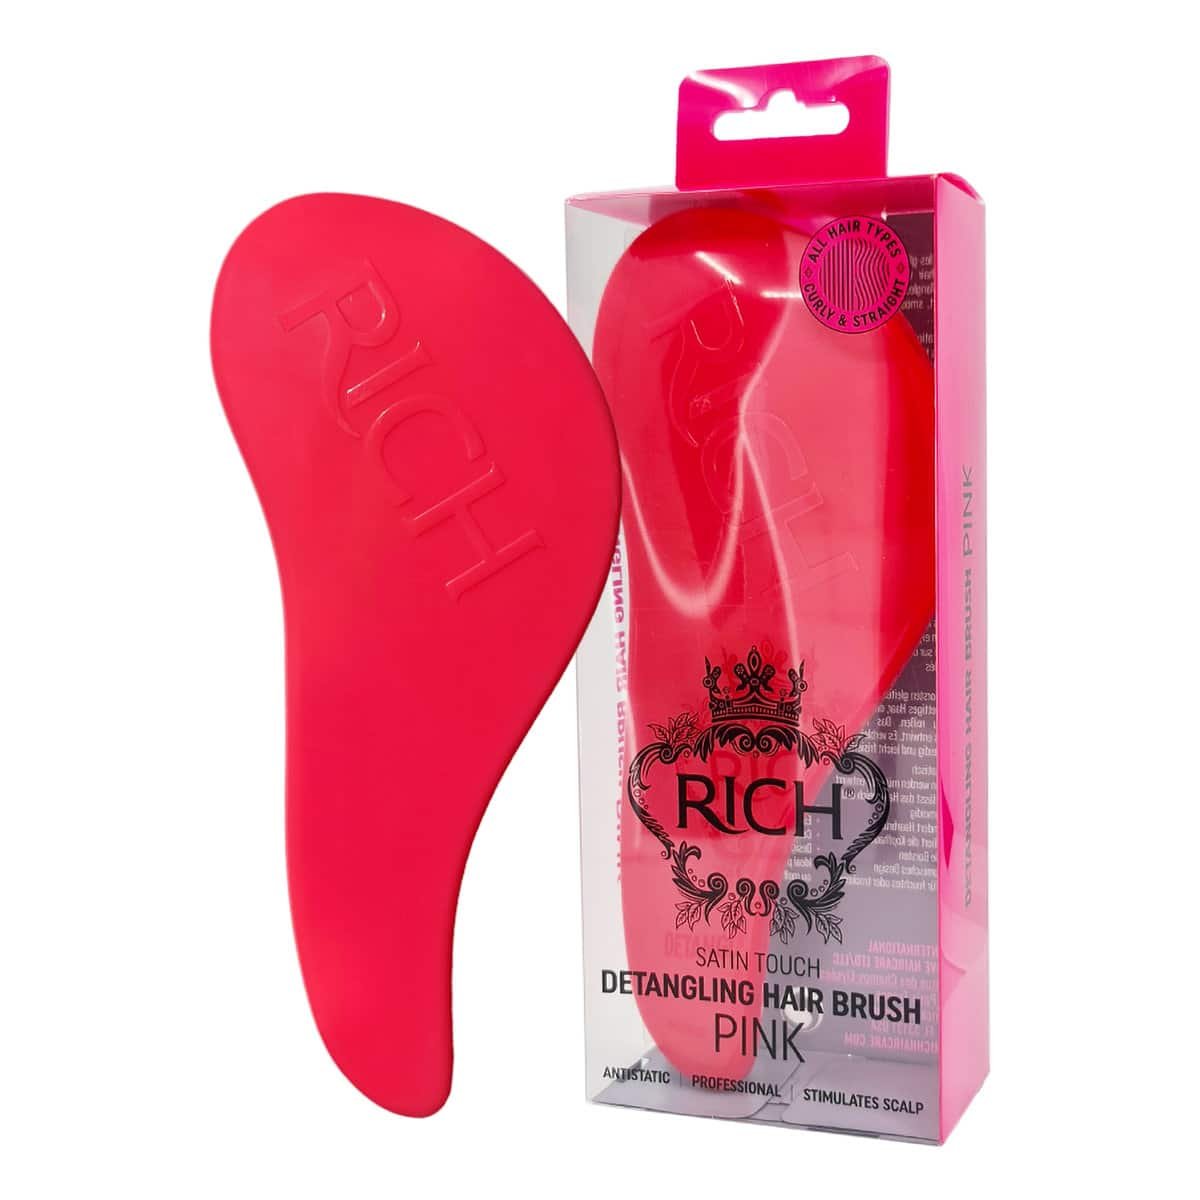 RICH Pure Luxury Satin Touch Detangling Brush Pink